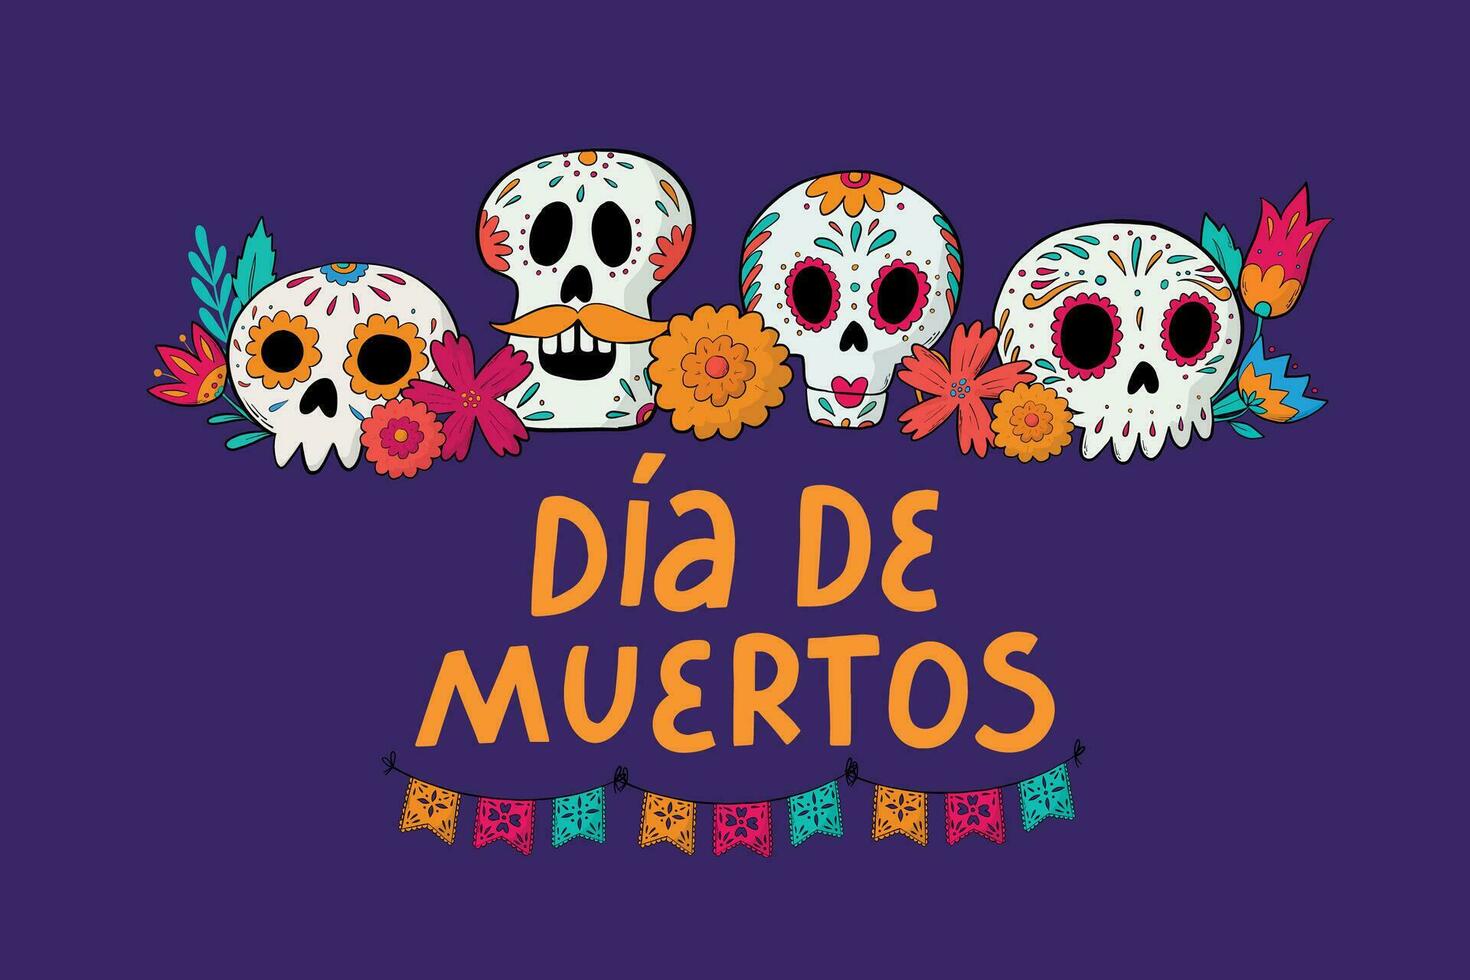 dia de muertos lettering quote decorated with doodles of skulls and flowers for banners, prints, cards, signs, invitations, templates, etc. EPS 10 vector